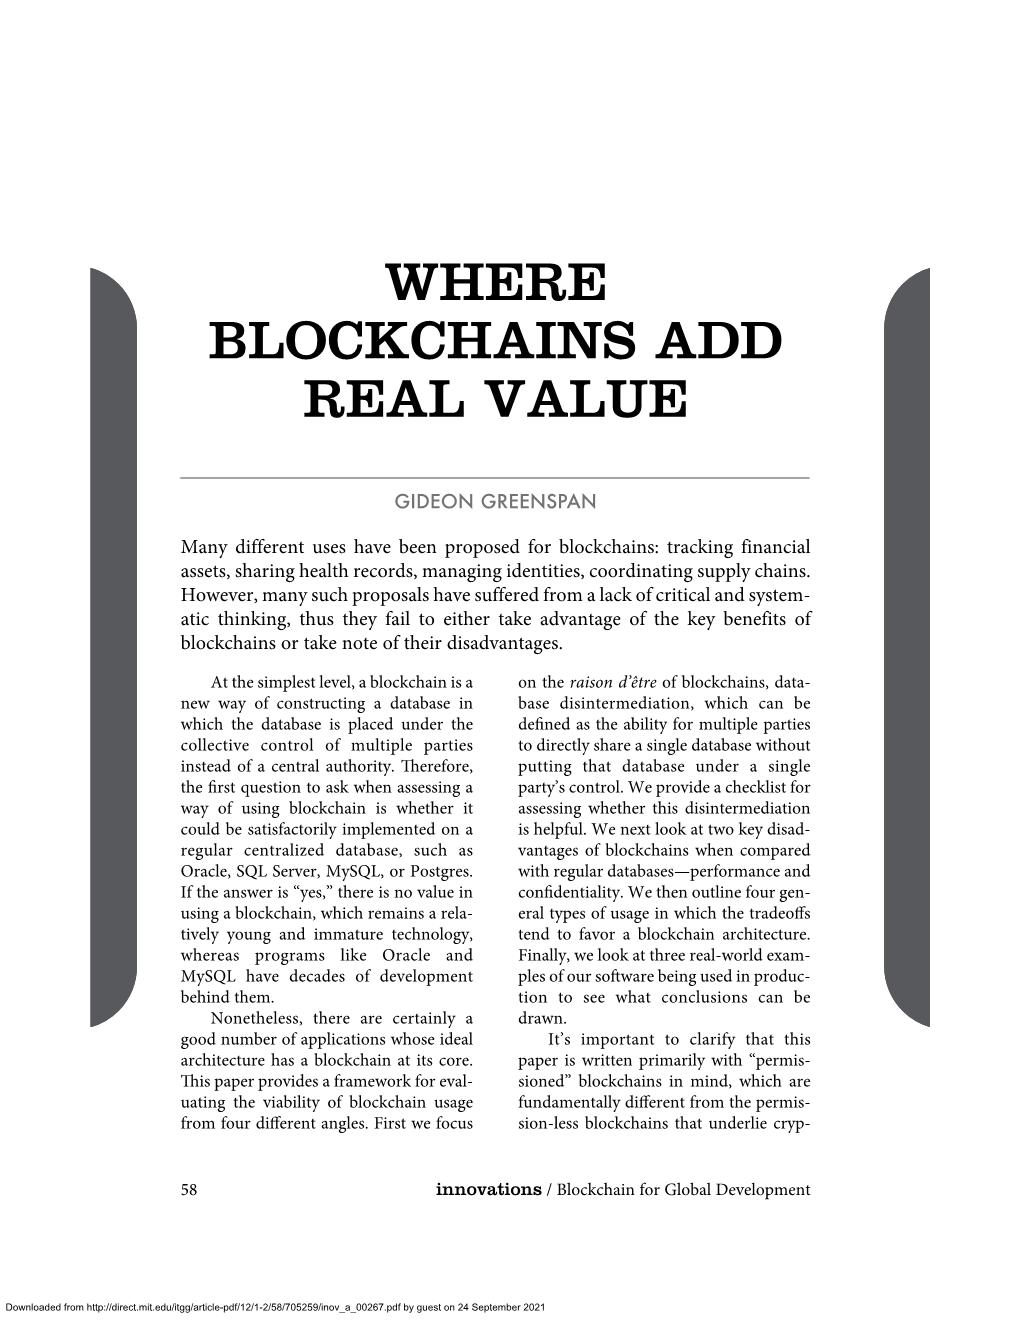 Where Blockchains Add Real Value